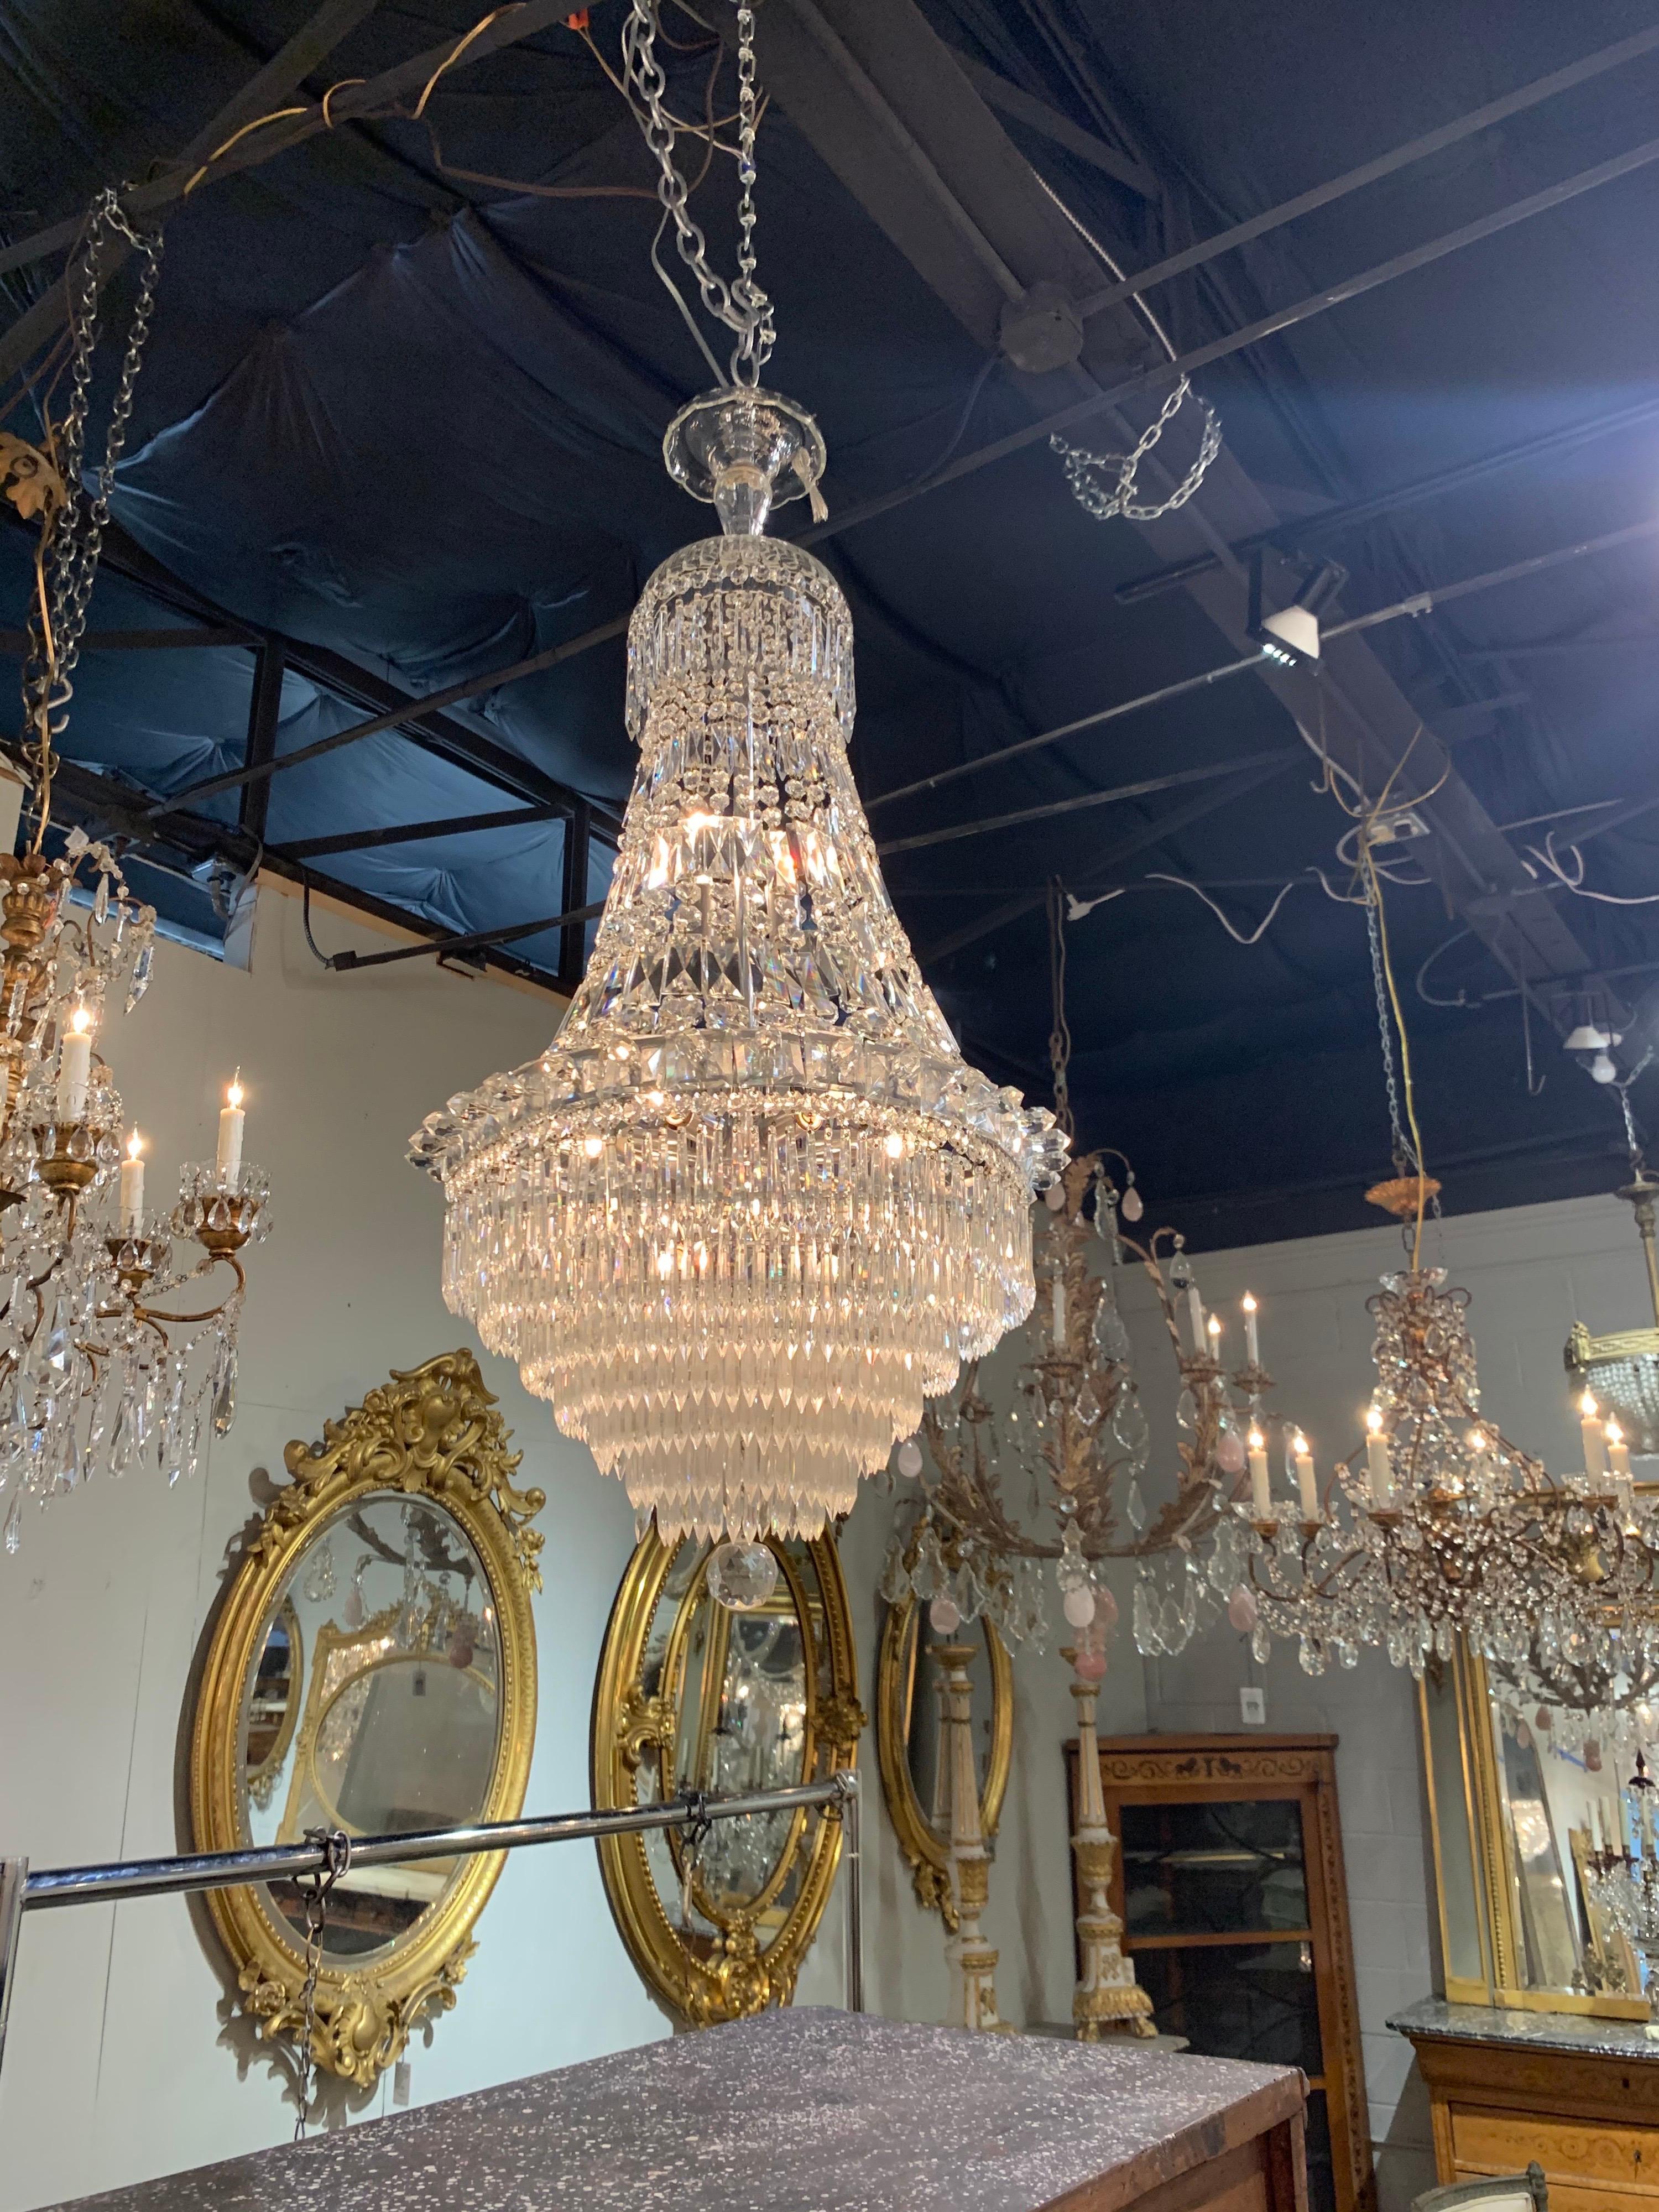 Early 20th century exquisite French waterfall style crystal chandelier. Featuring a lovely array of crystals and prisms. Creates a very classy elegant look!